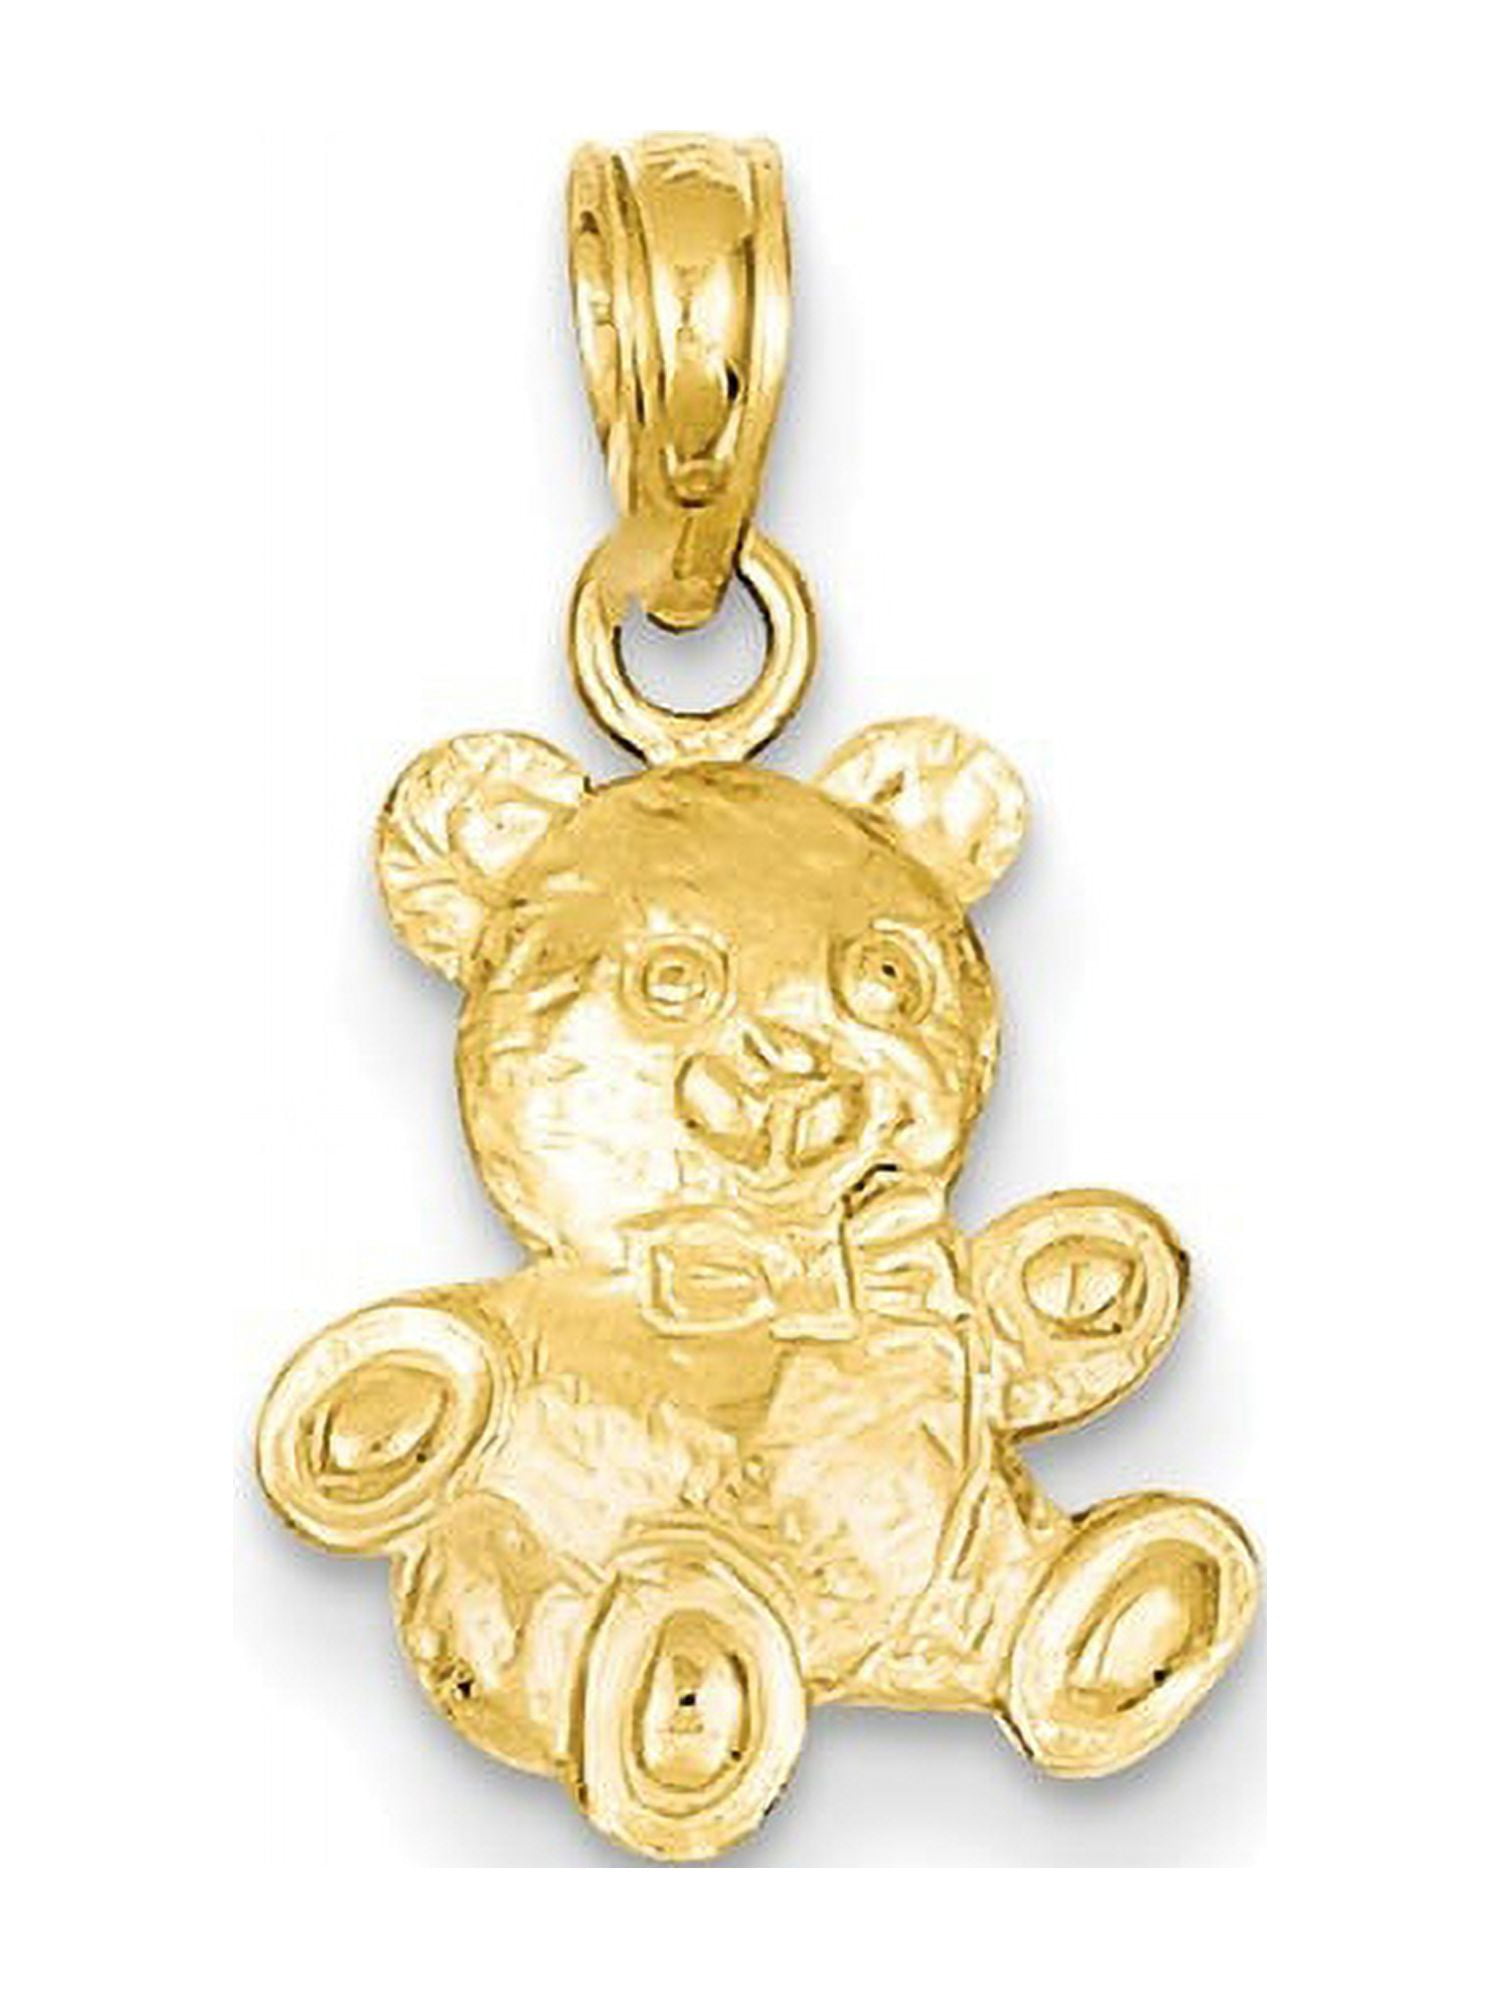 Teddy Bear with Ballon Pendant Necklace in Rose Gold